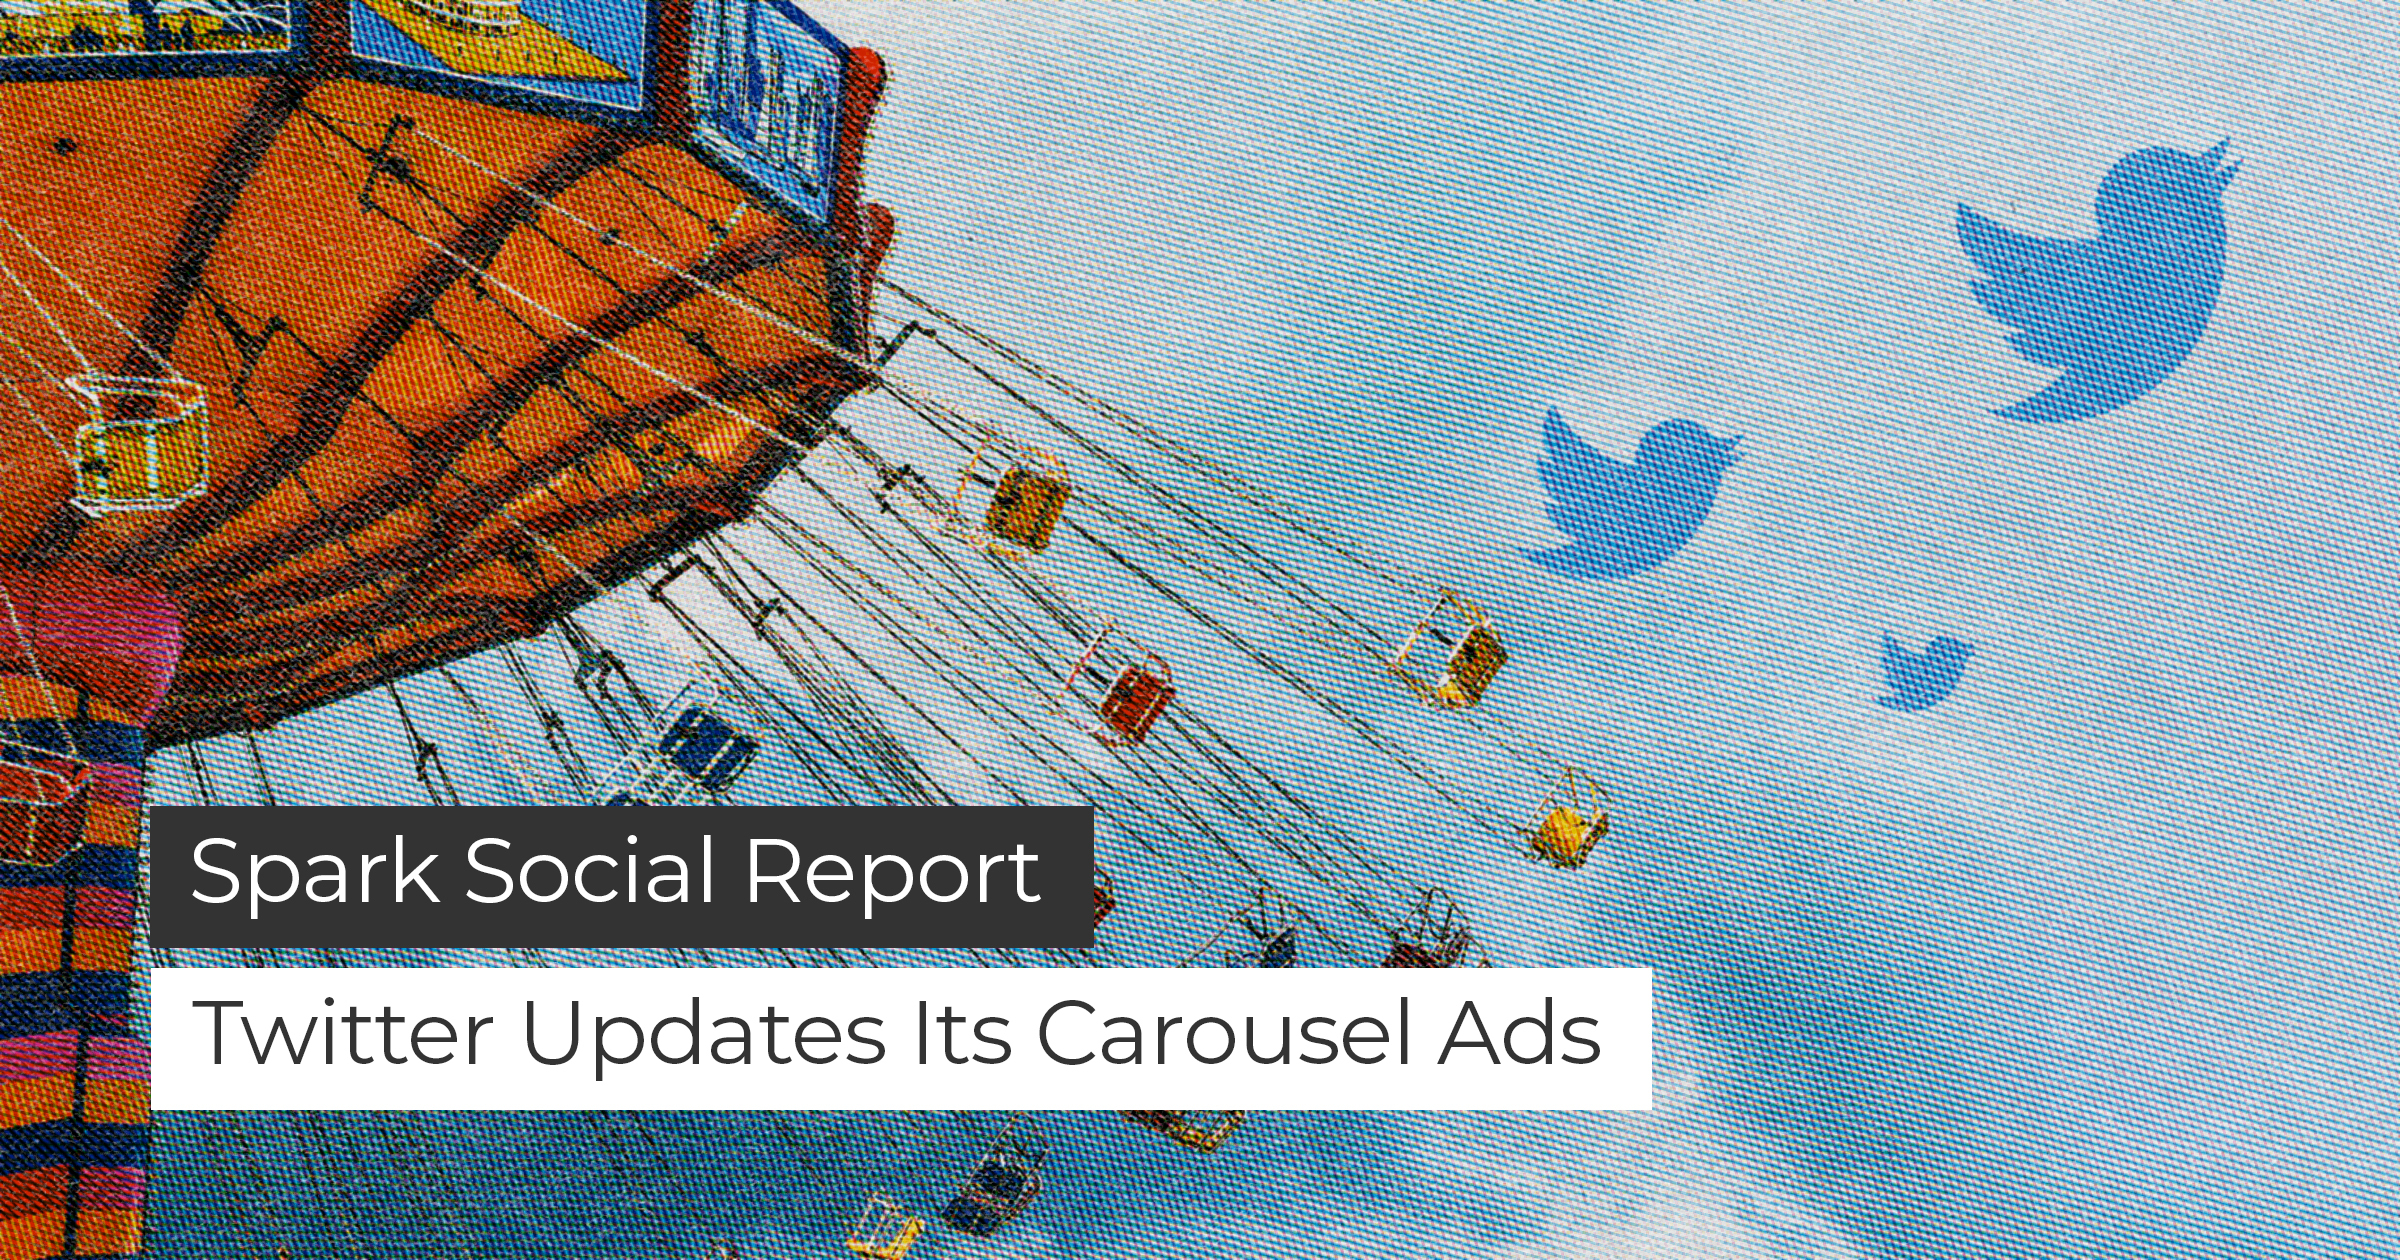 image of air carousel in the background with title spark social report twitter updates its carousel ads